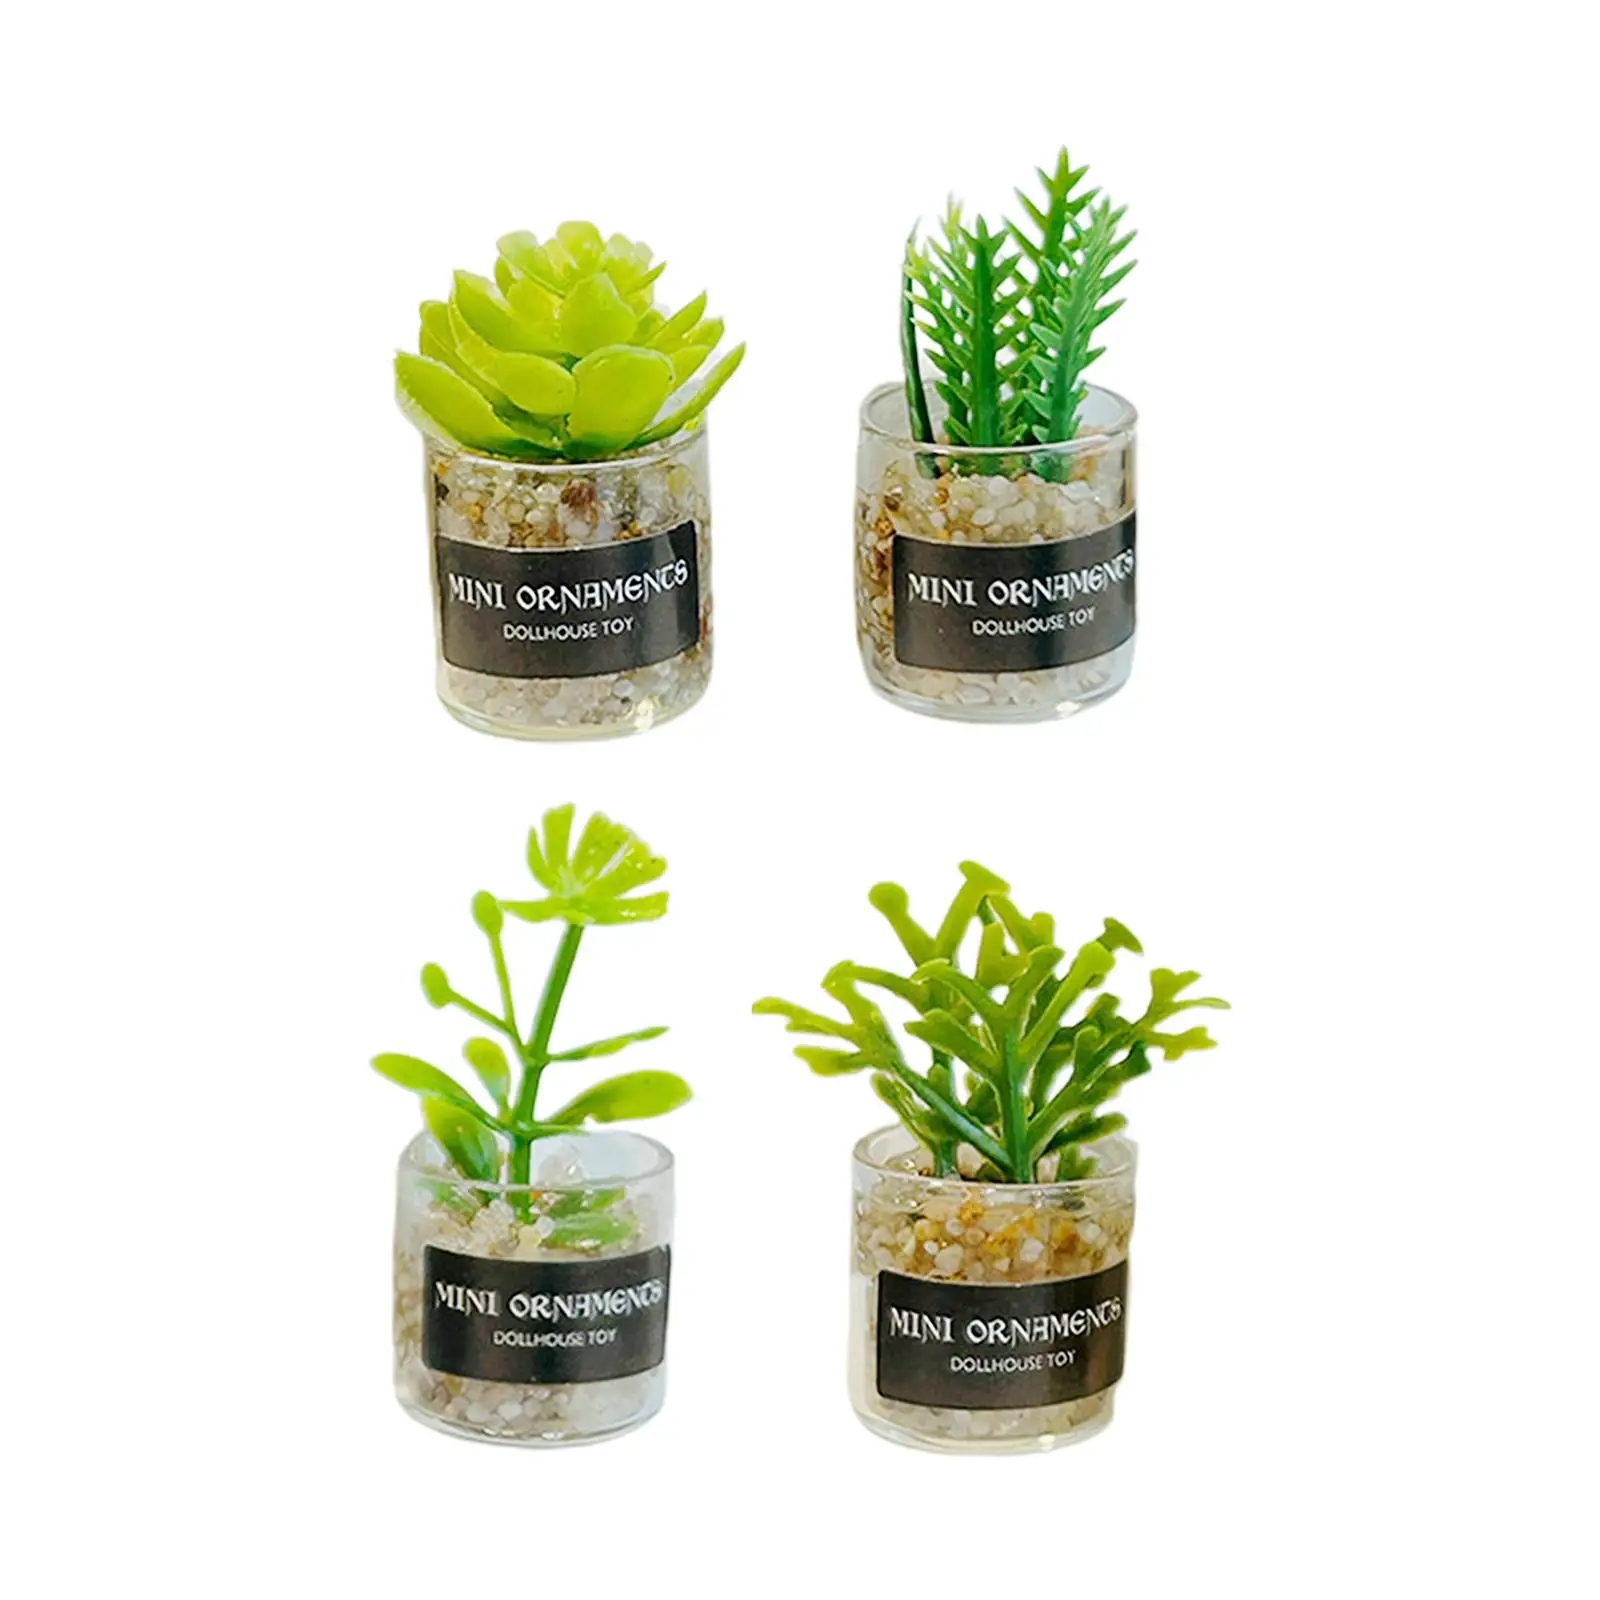 

4x 1:12 Scale Dollhouse Miniature Green Plants Fake Greenery Ornament Tiny Bonsai Potted Plants for Dollhouse Scene Tabletop